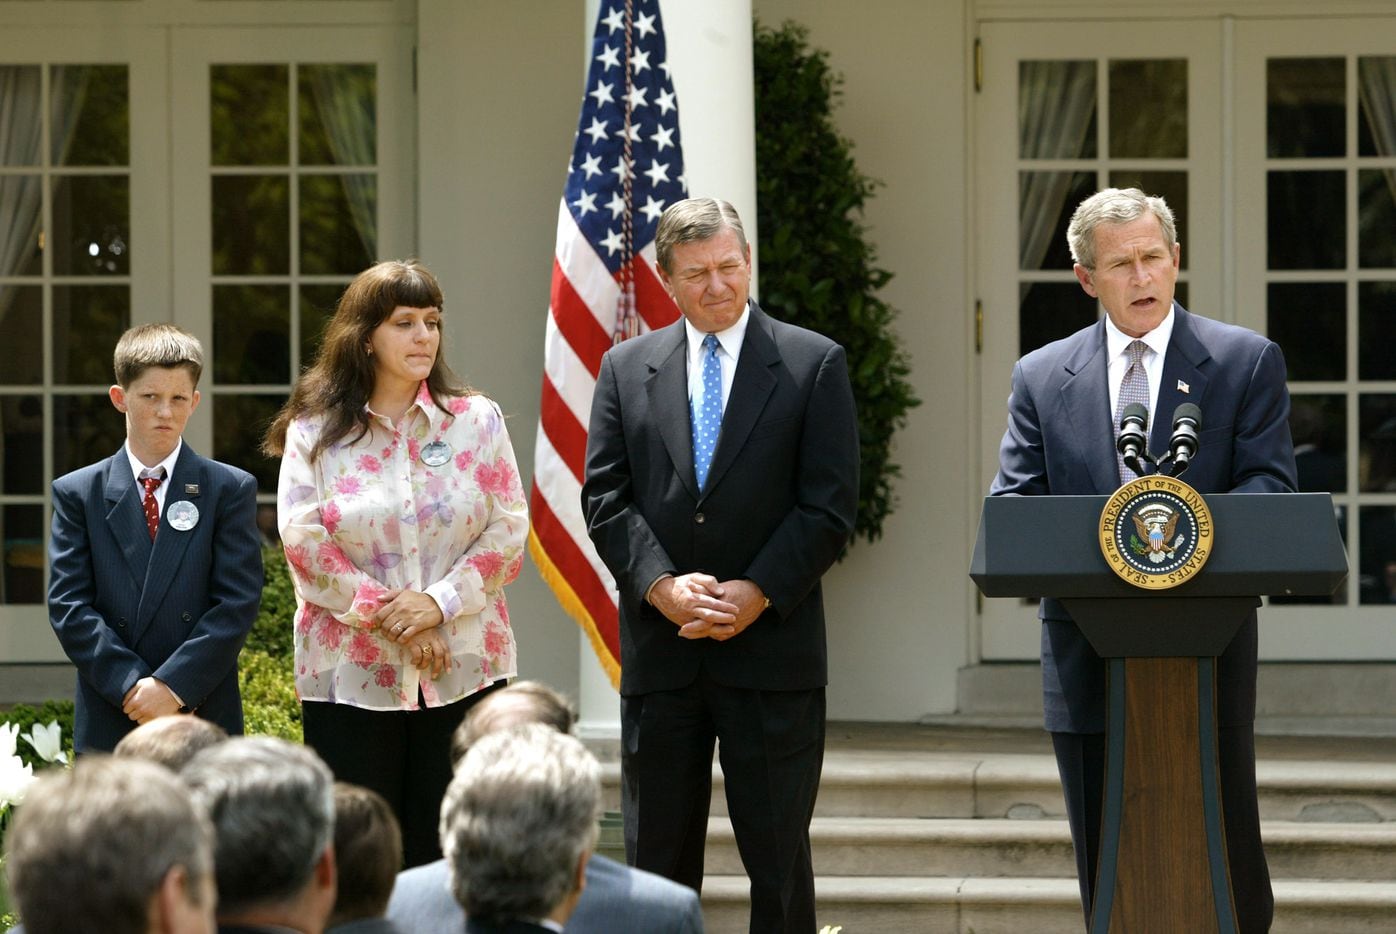 President George W. Bush speaks before signing Amber Alert legislation into law during a Rose Garden ceremony at the White House on Wednesday, April 30, 2003. The law creates a nationwide voluntary rapid-response network to help find kidnapped children. Bush is joined by Attorney General John Ashcroft, center, and Donna Norris, second from left, the mother of the bill's namesake, 9-year-old Amber Hagerman who was abducted in 1996 in Arlington, Texas, and later found murdered. Her son Rick Hagerman stands at far left.